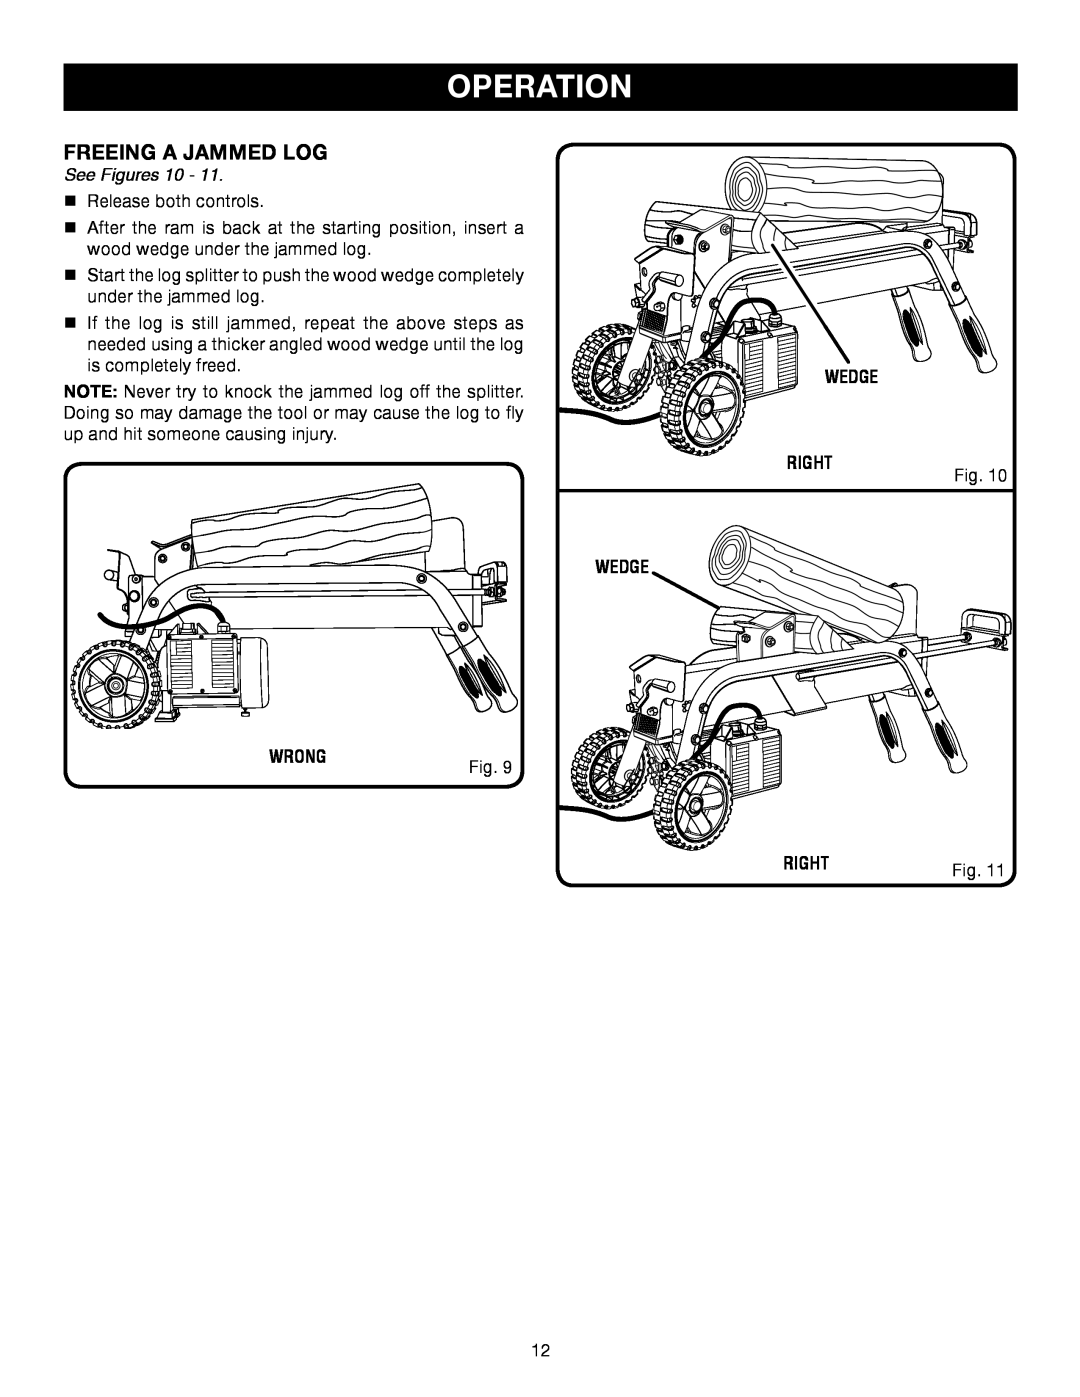 Ryobi Outdoor RY49701 manual Freeing A Jammed Log, Operation, See Figures 10, Wedge, Right, Wrong 